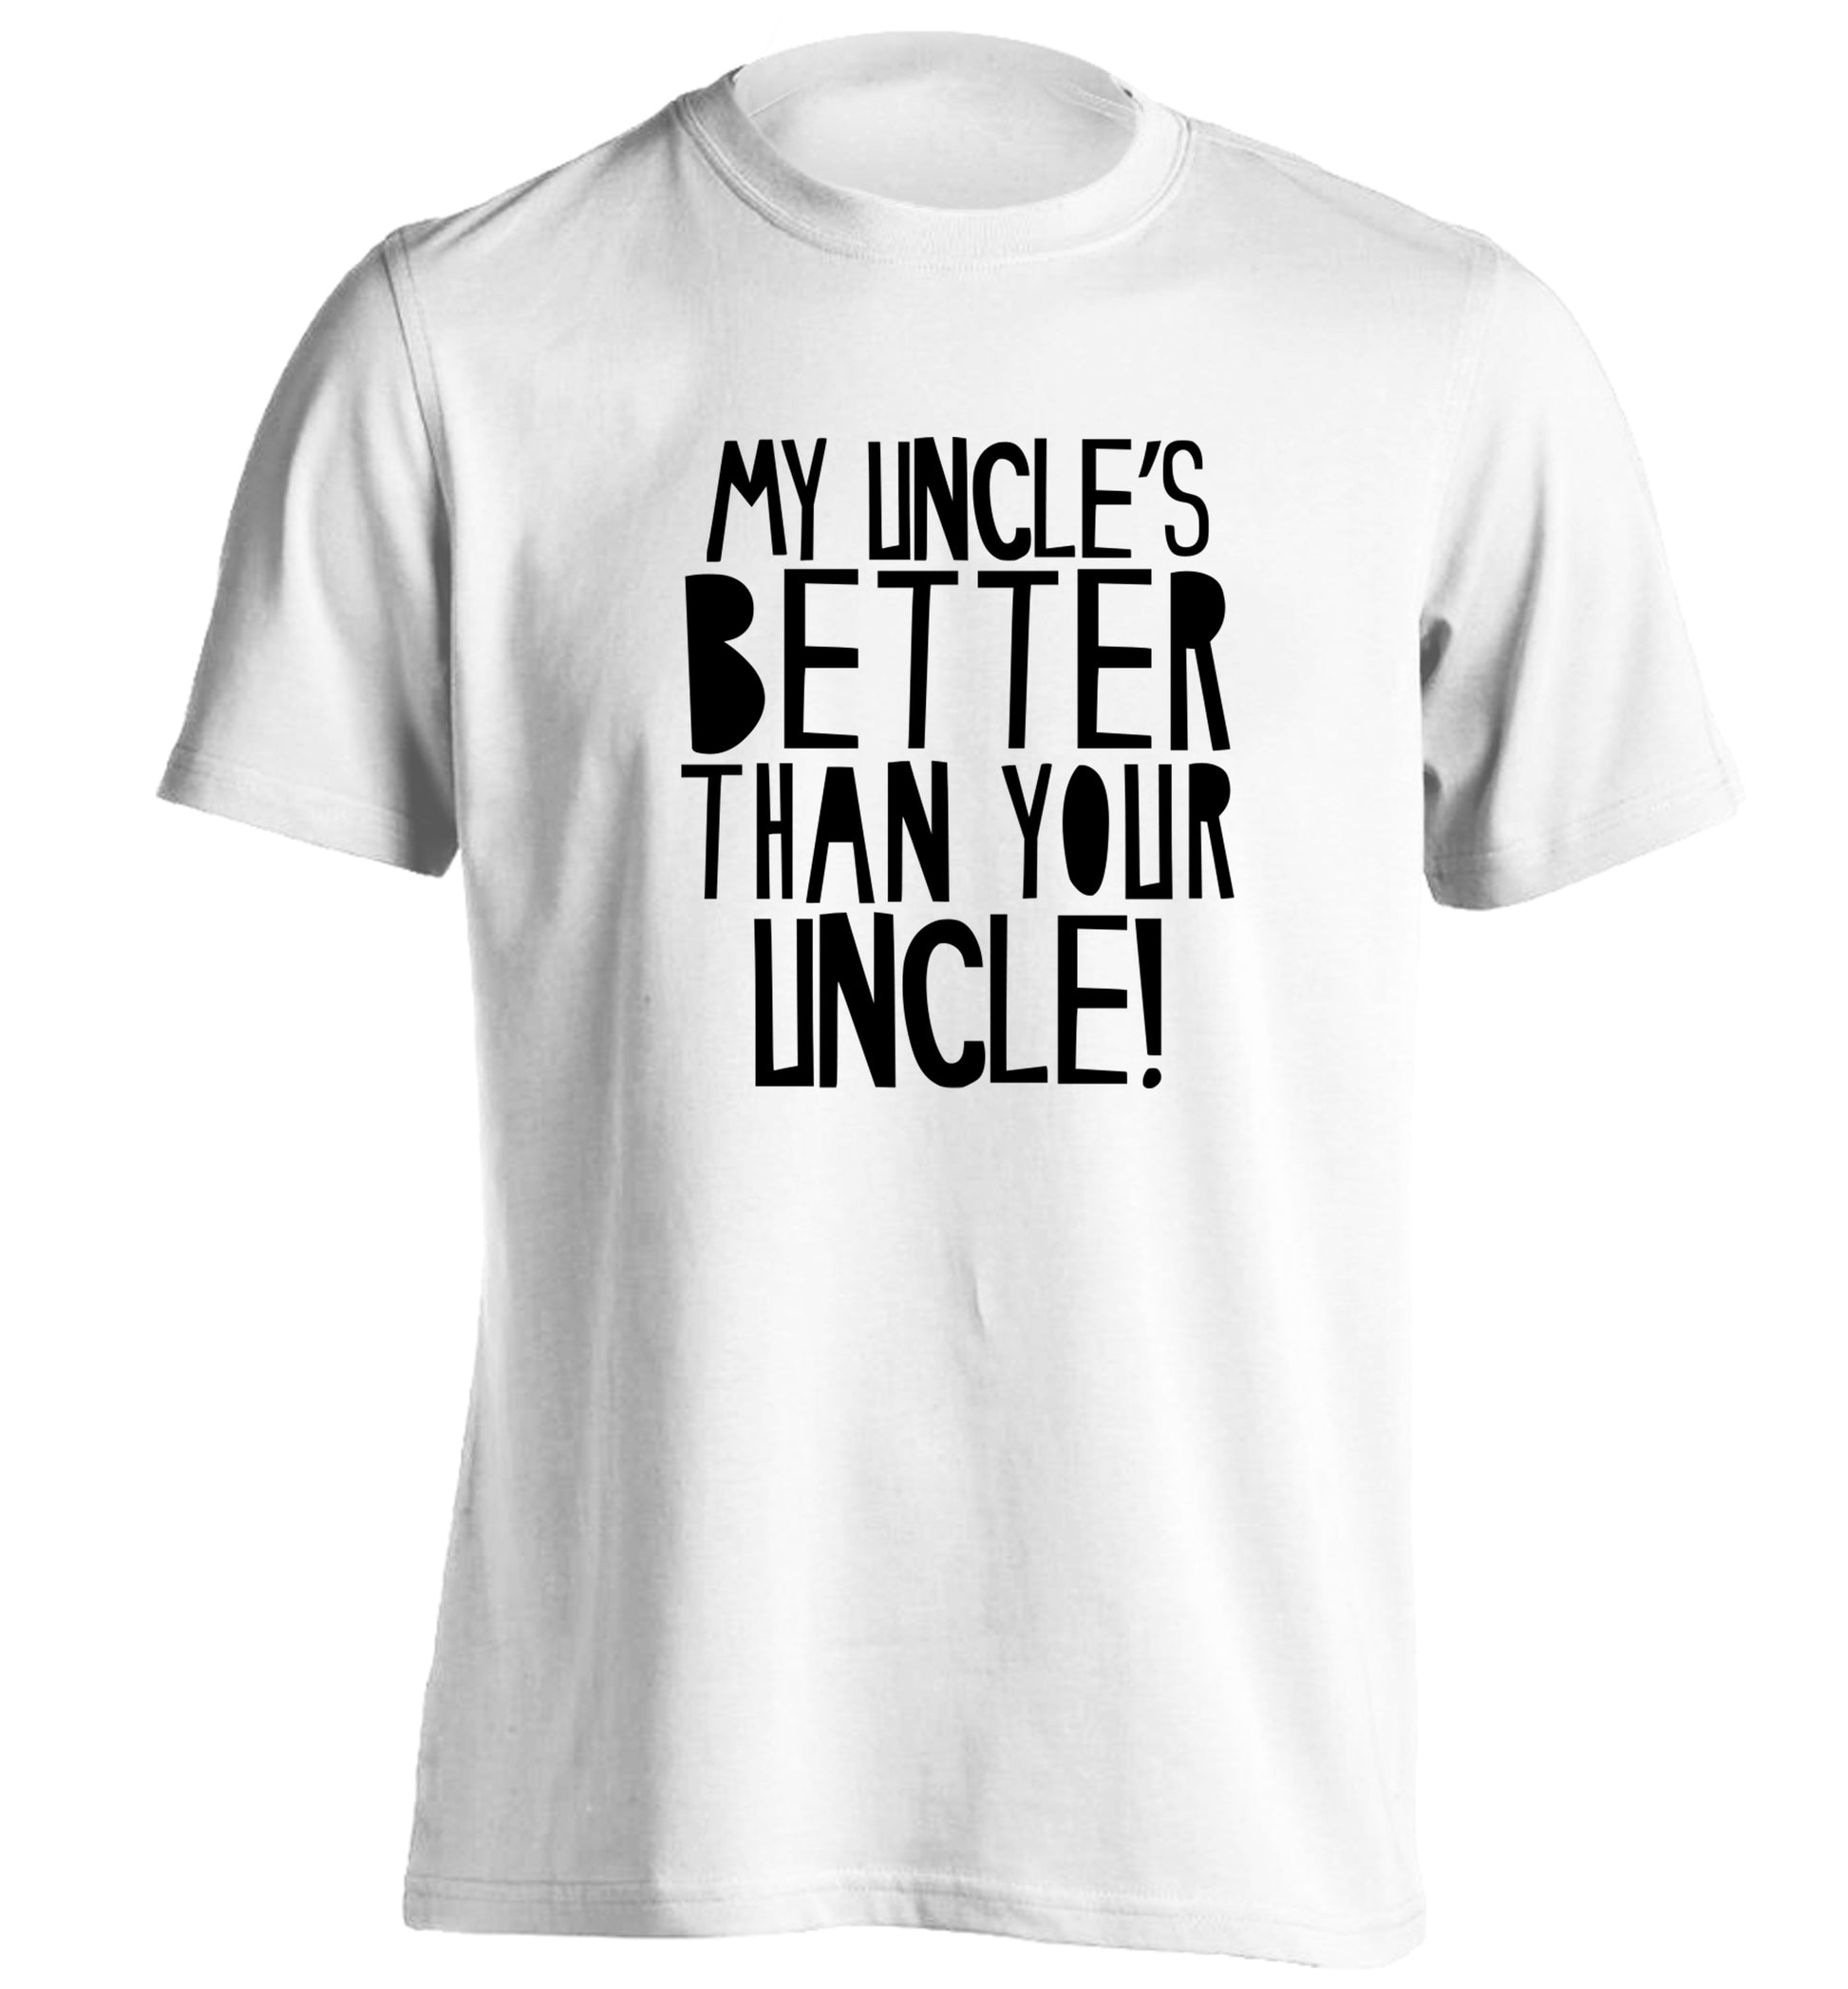 My uncles better than your uncle adults unisex white Tshirt 2XL